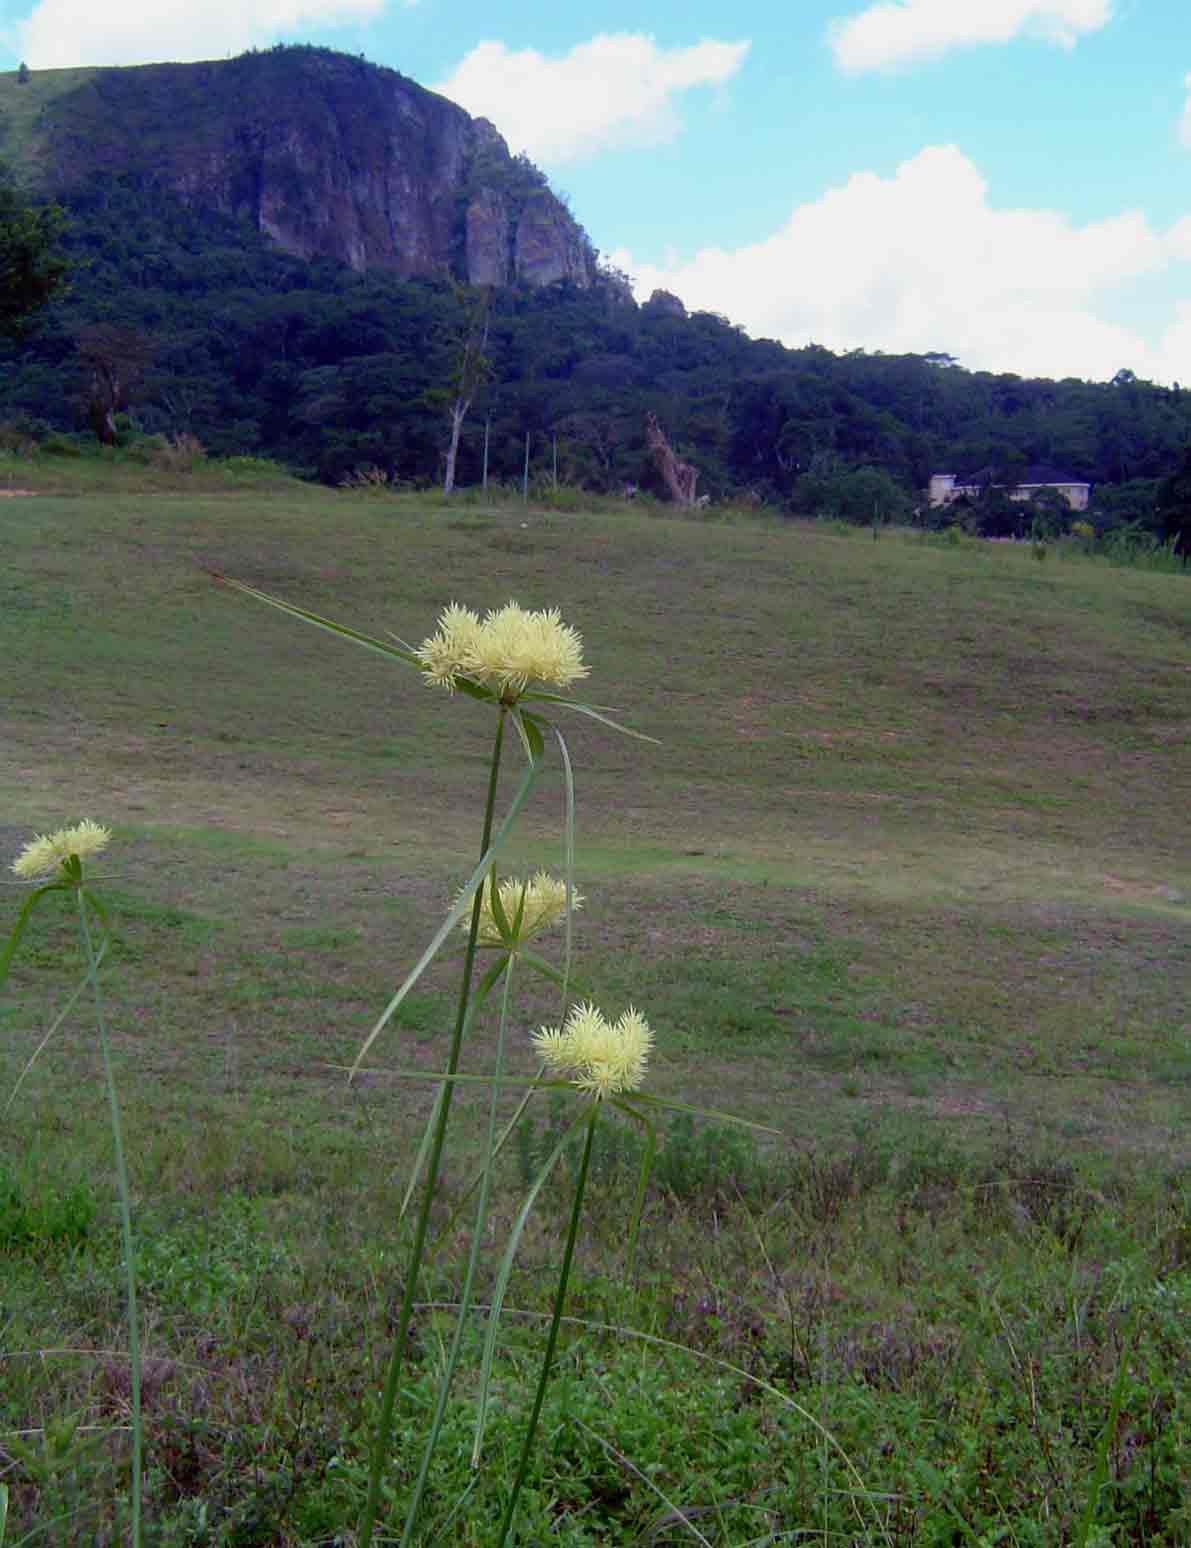 Chinyakwaremba from the Leopard Rock golf course. The pale yellow heads of <a href="species.php?species_id=110300">Mariscus hemisphaericus</a> are in the foreground.